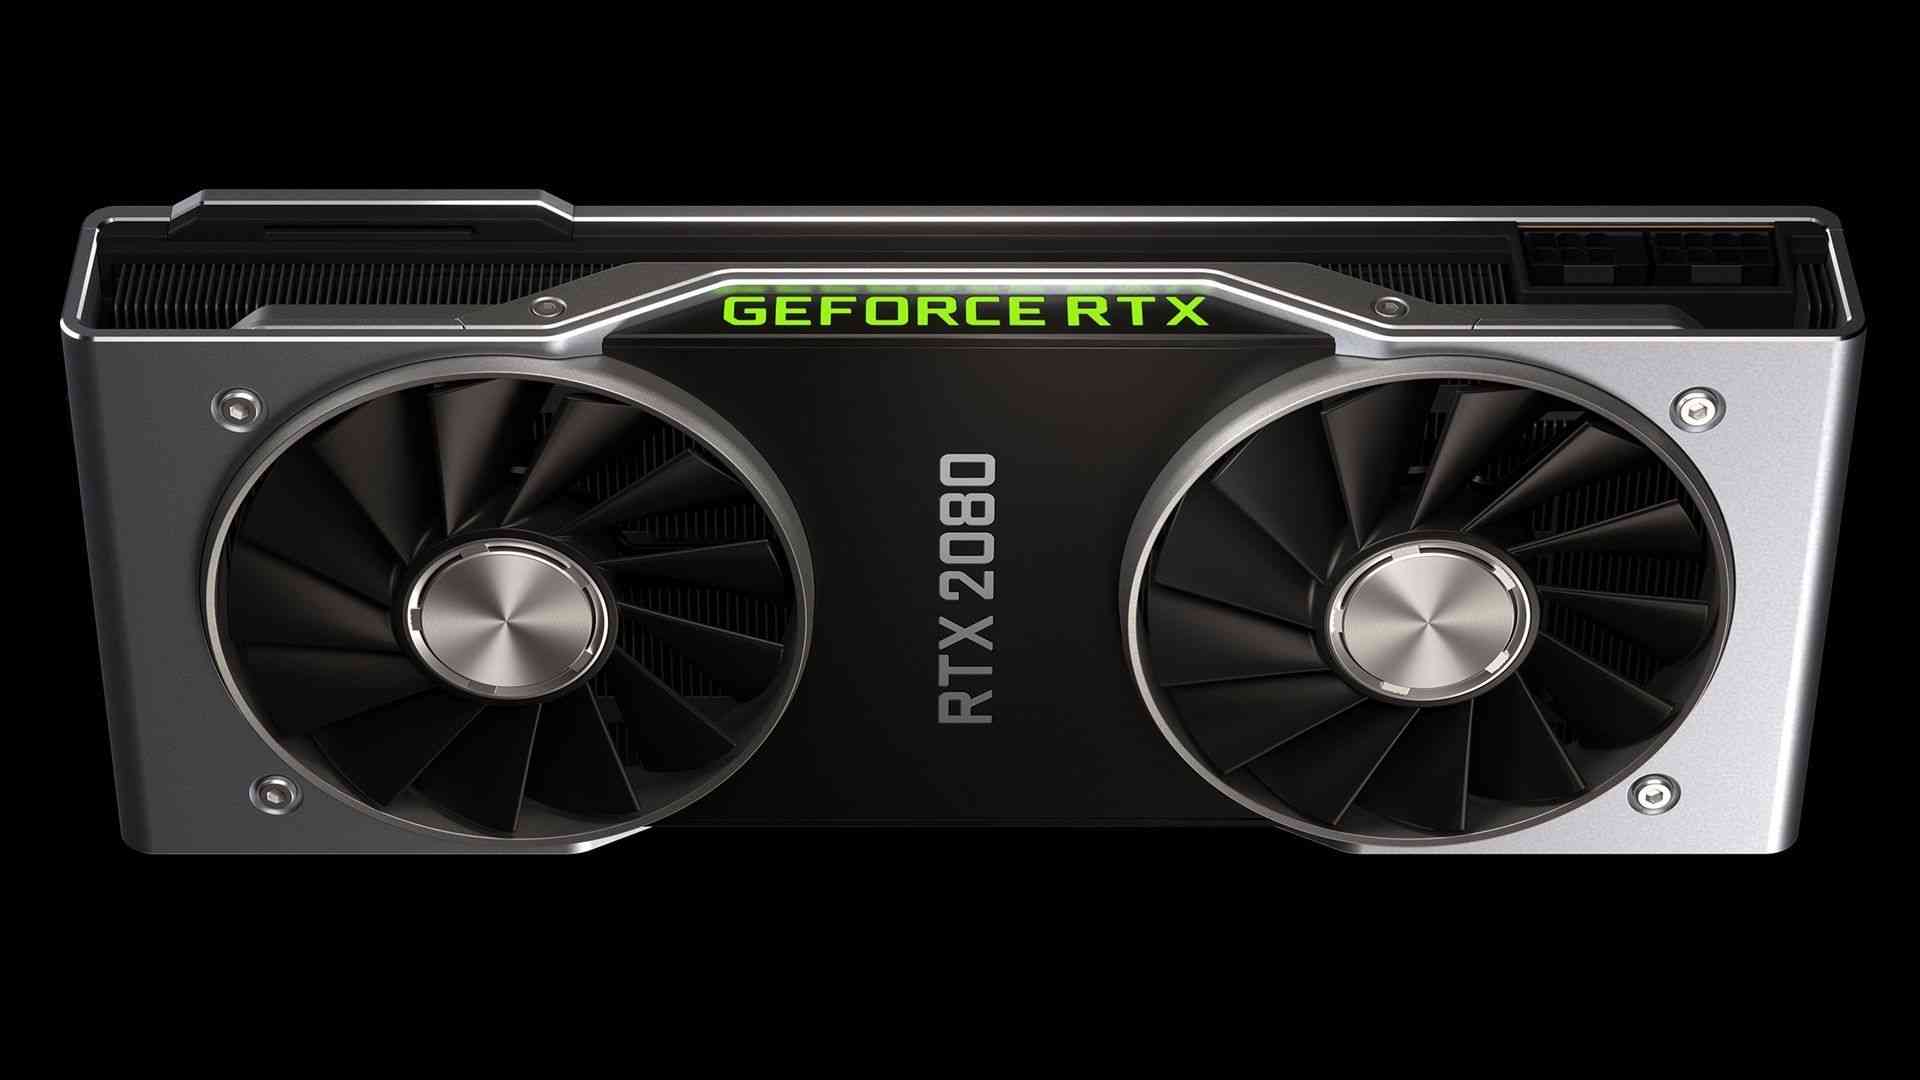 nvidia is ambitious with geforce rtx 2080 ti cards big 1